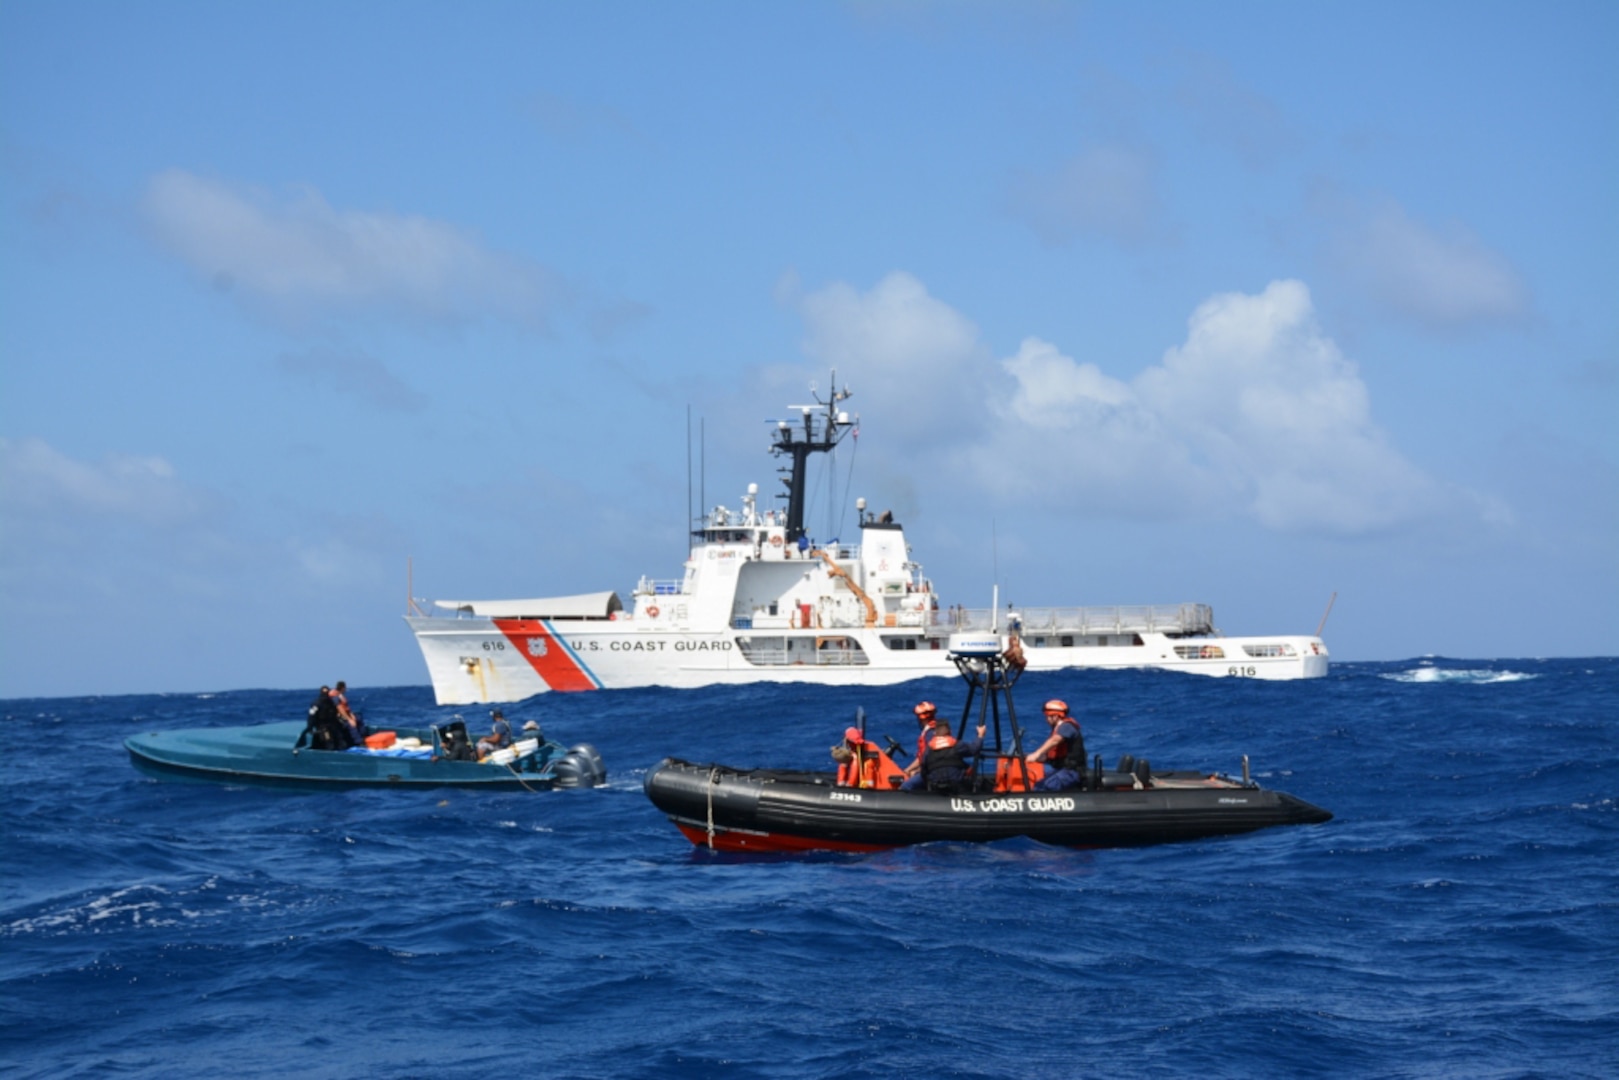 A Coast Guard Cutter Diligence pursuit team interdicts a "go-fast" boat suspected of smuggling illegal drugs. From left to right in the in the "go-fast" is Lt. j.g. Edward Hobaica, and Petty Officer 2nd Class Jussen Gonzales, while from left to right on the Coast Guard response boat is Petty Officer 2nd Class Anthony Sanabria, Petty Officer 2nd Class Charles Murray and Petty Officer 1st Class Adam Mallard. (U.S. Coast Guard photo by Cutter Diligence/Released)